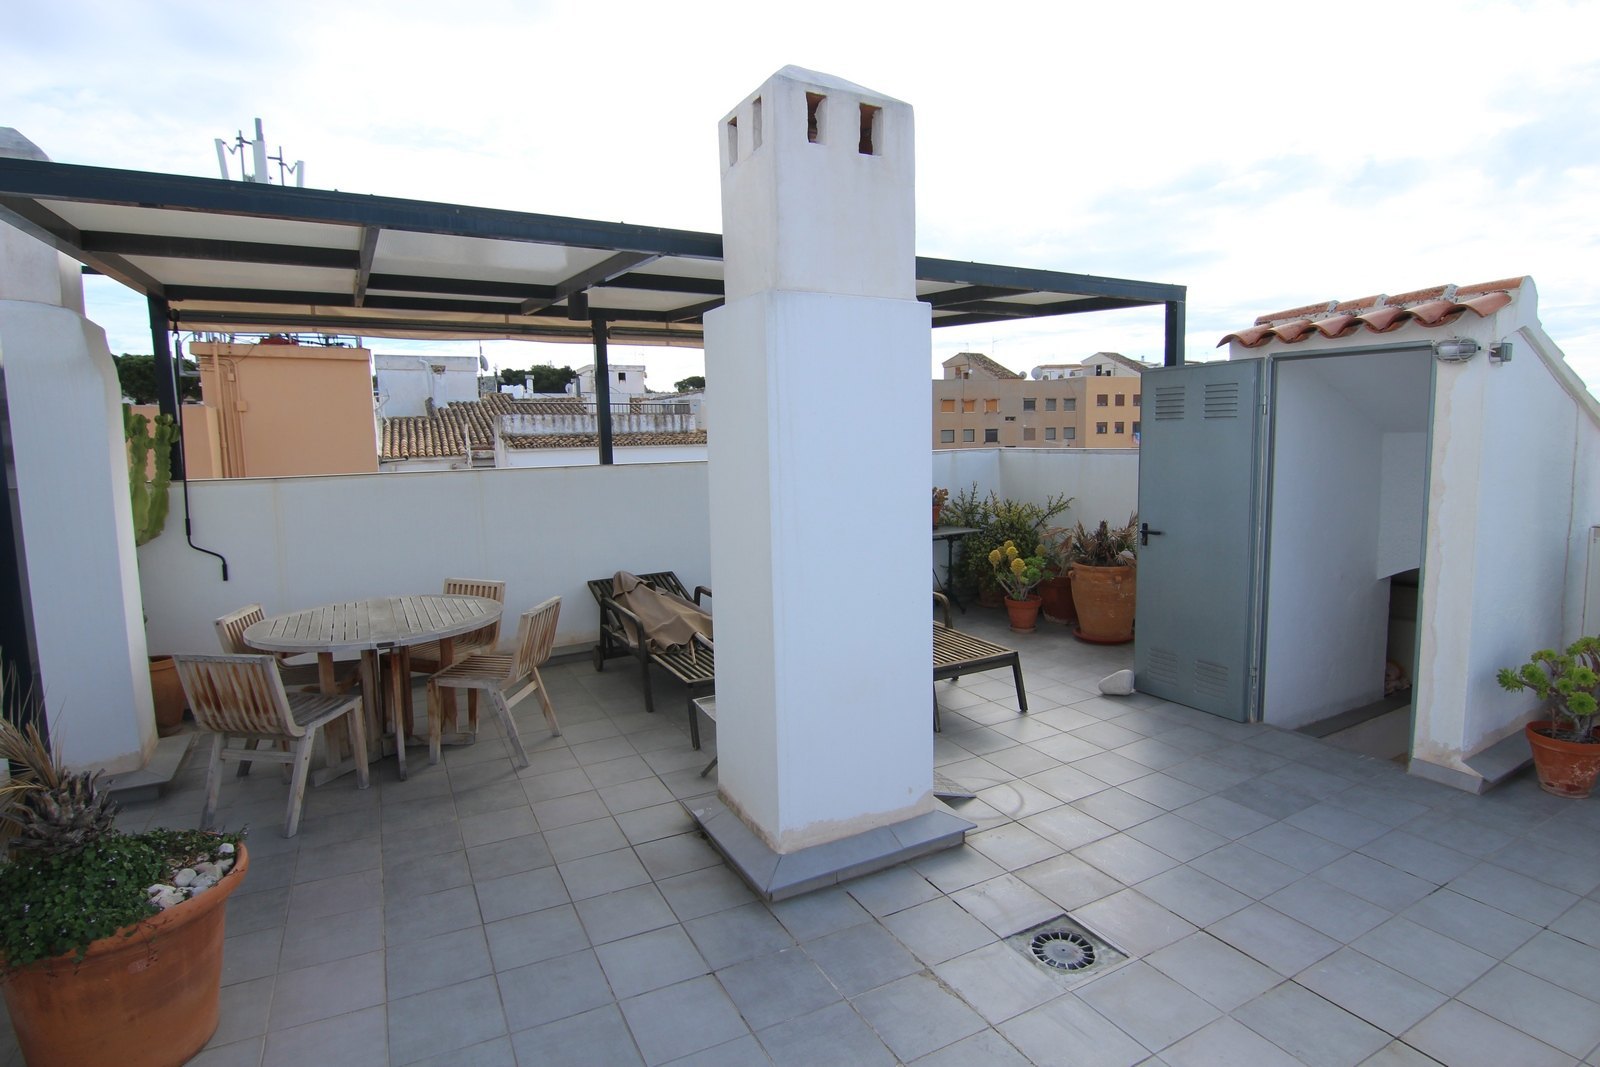 Penthouse with sea view terraces in Moraira's centre.